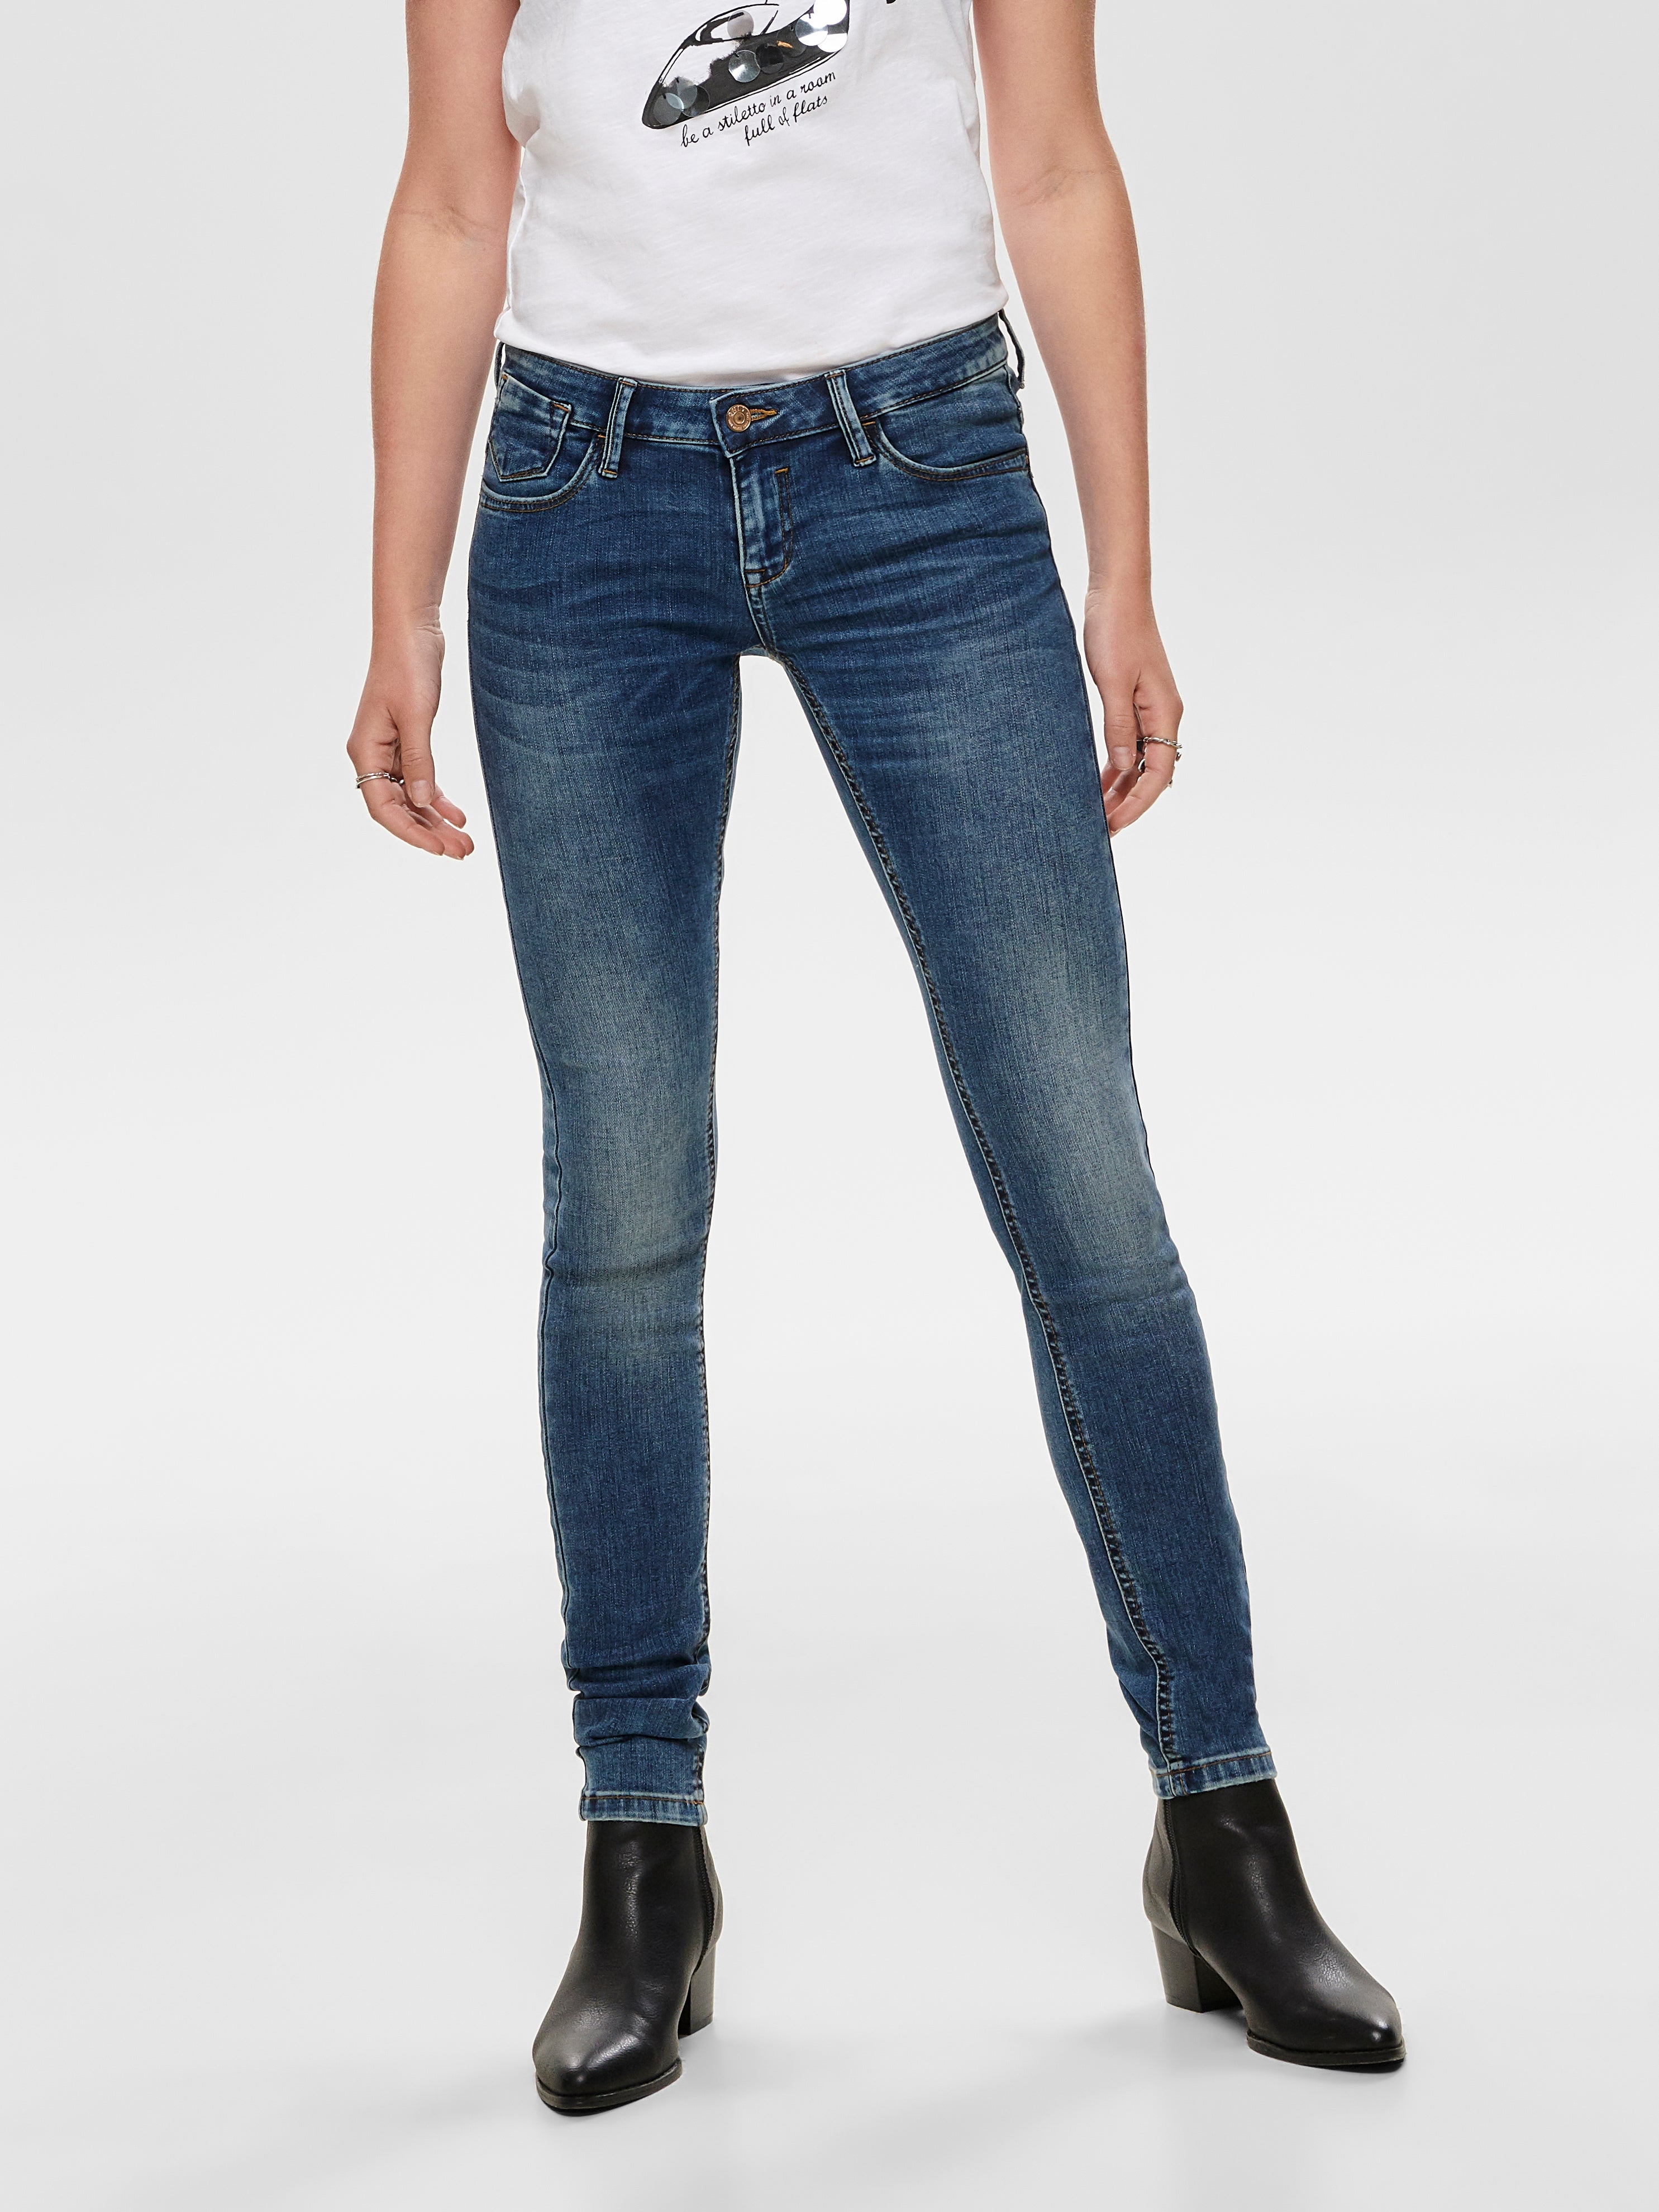 T 38 Skinny Jeans Only Damen Damen Kleidung Only Damen Jeans Only Damen Skinny Jeans Only Damen Skinny Jeans ONLY W28 blau 